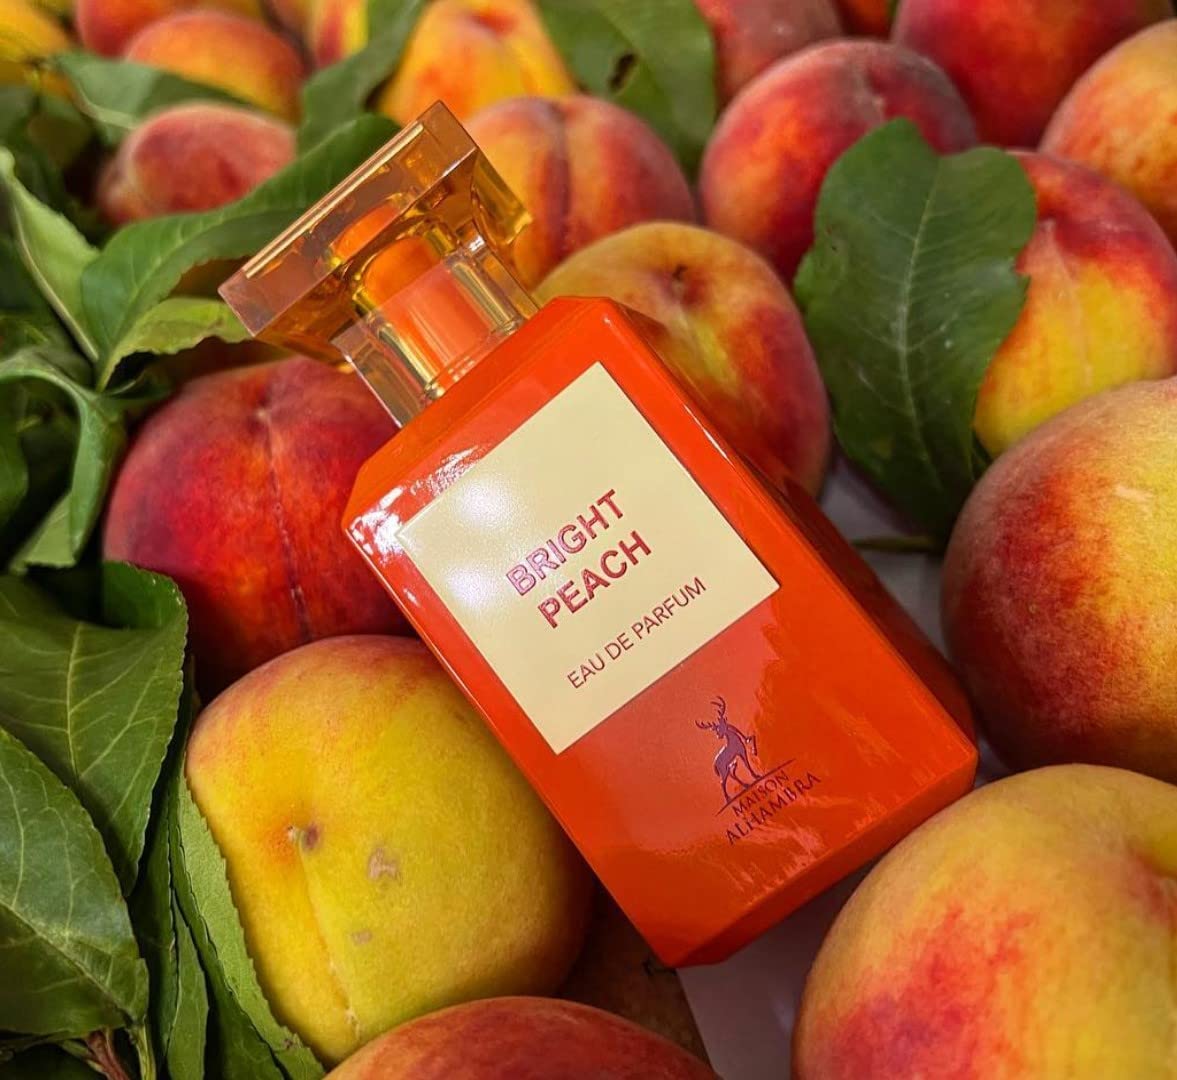 Bright Peach 80ml | Eau De Parfum | Perfume For Women & Men By Maison Alhambra (Inspired By Bitter Peach By Tom Ford)